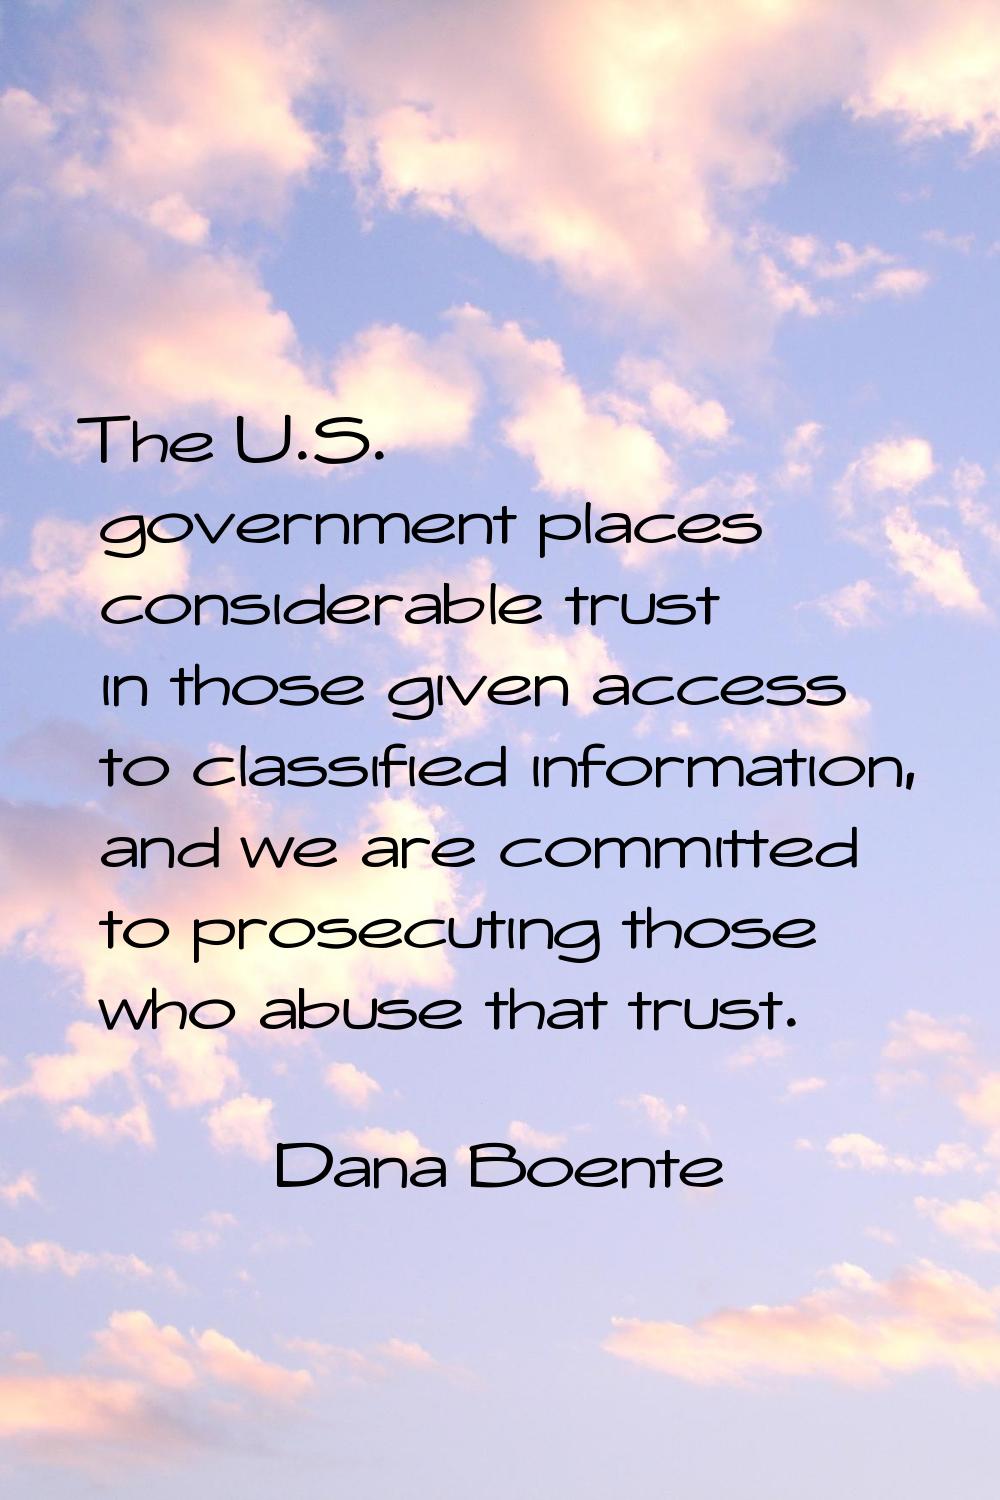 The U.S. government places considerable trust in those given access to classified information, and 